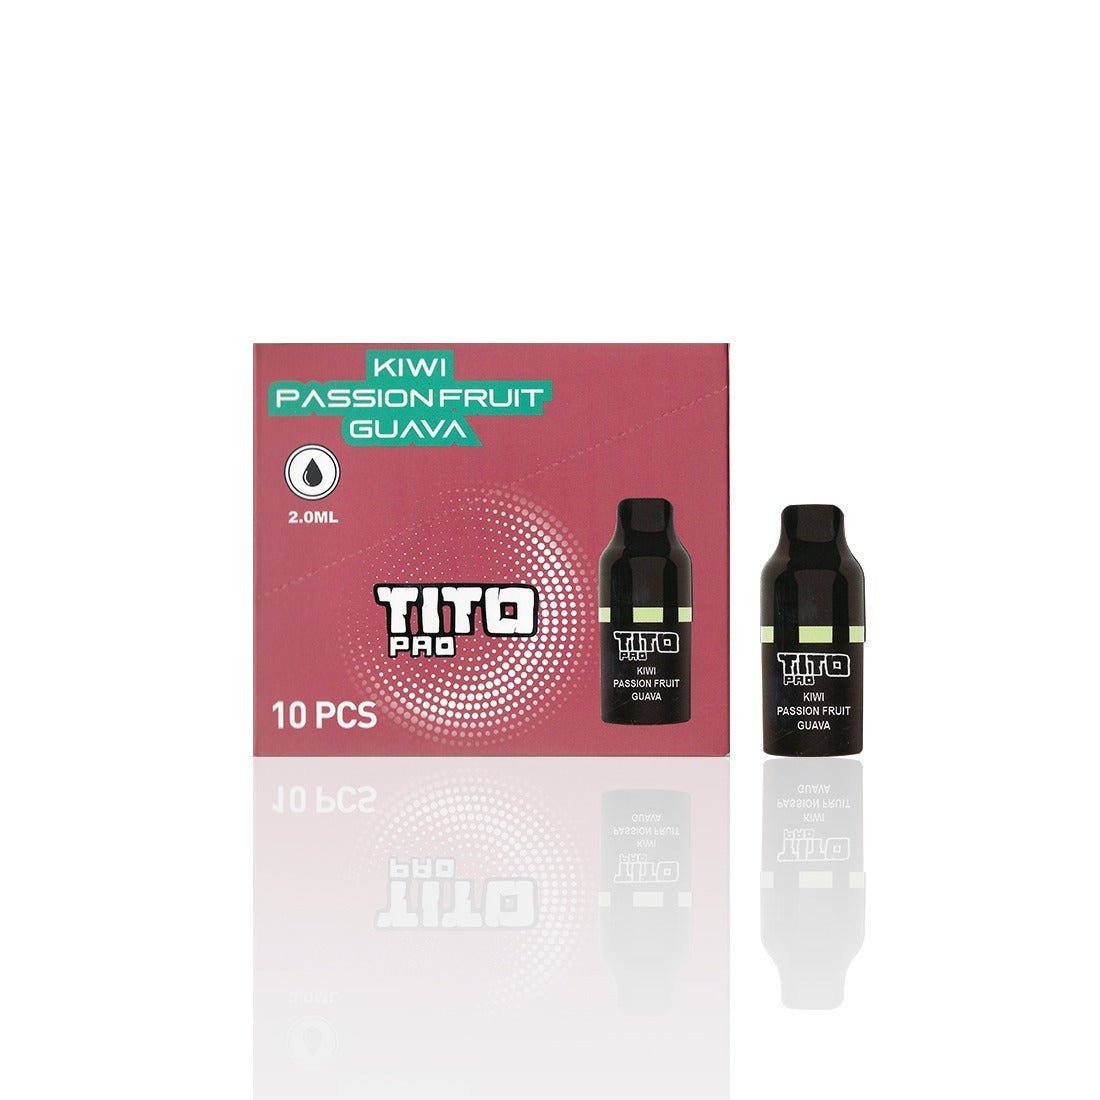 Tito Pro Pre-filled Replacement Vape Pods - simbavapes